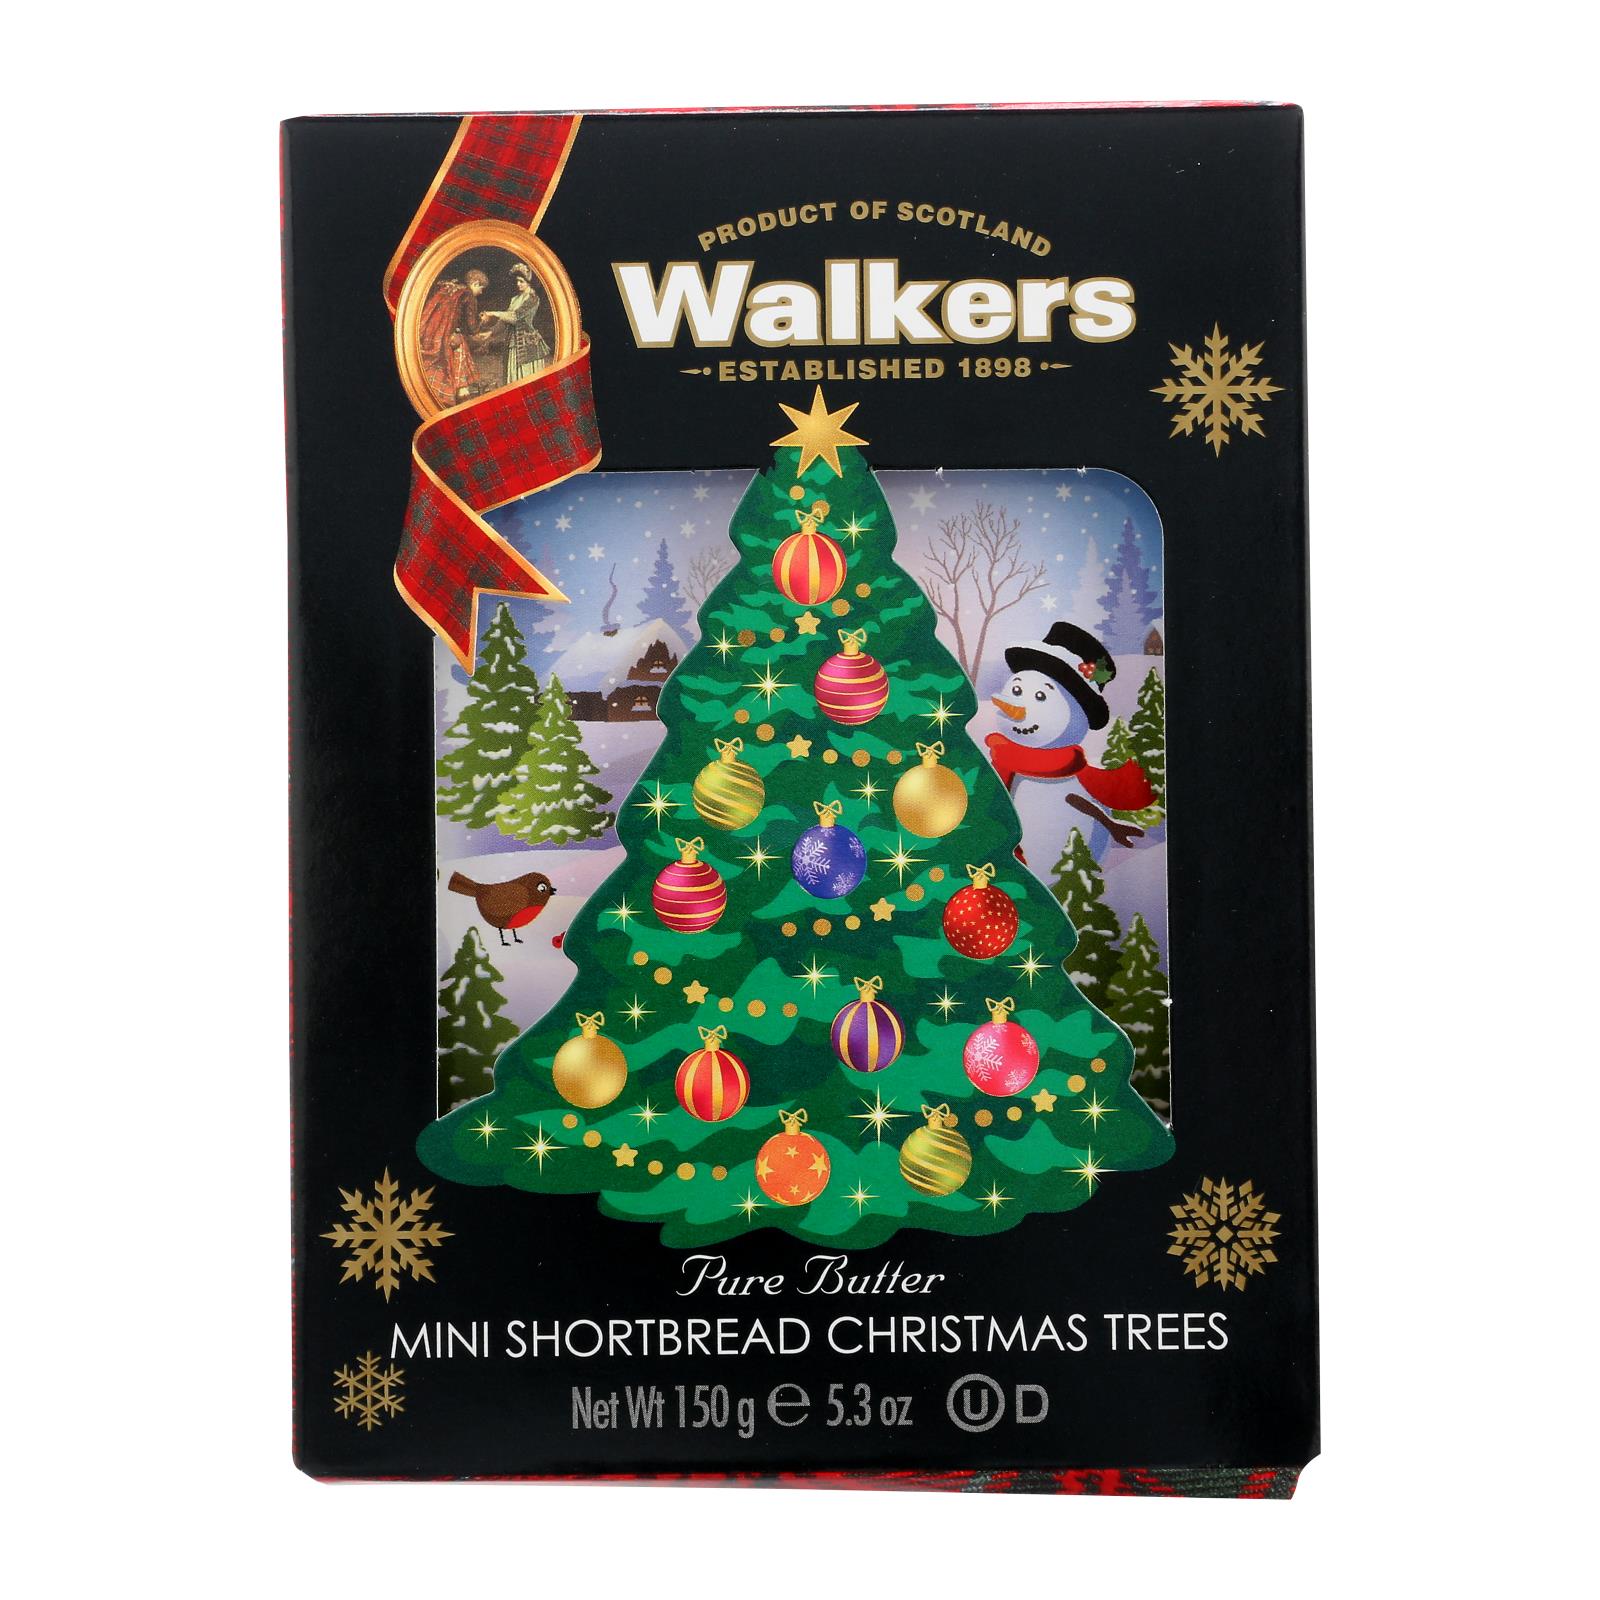 Walkers Pure Butter Mini Christmas Trees Shortbread - 10개 묶음상품 - 5.3 OZ